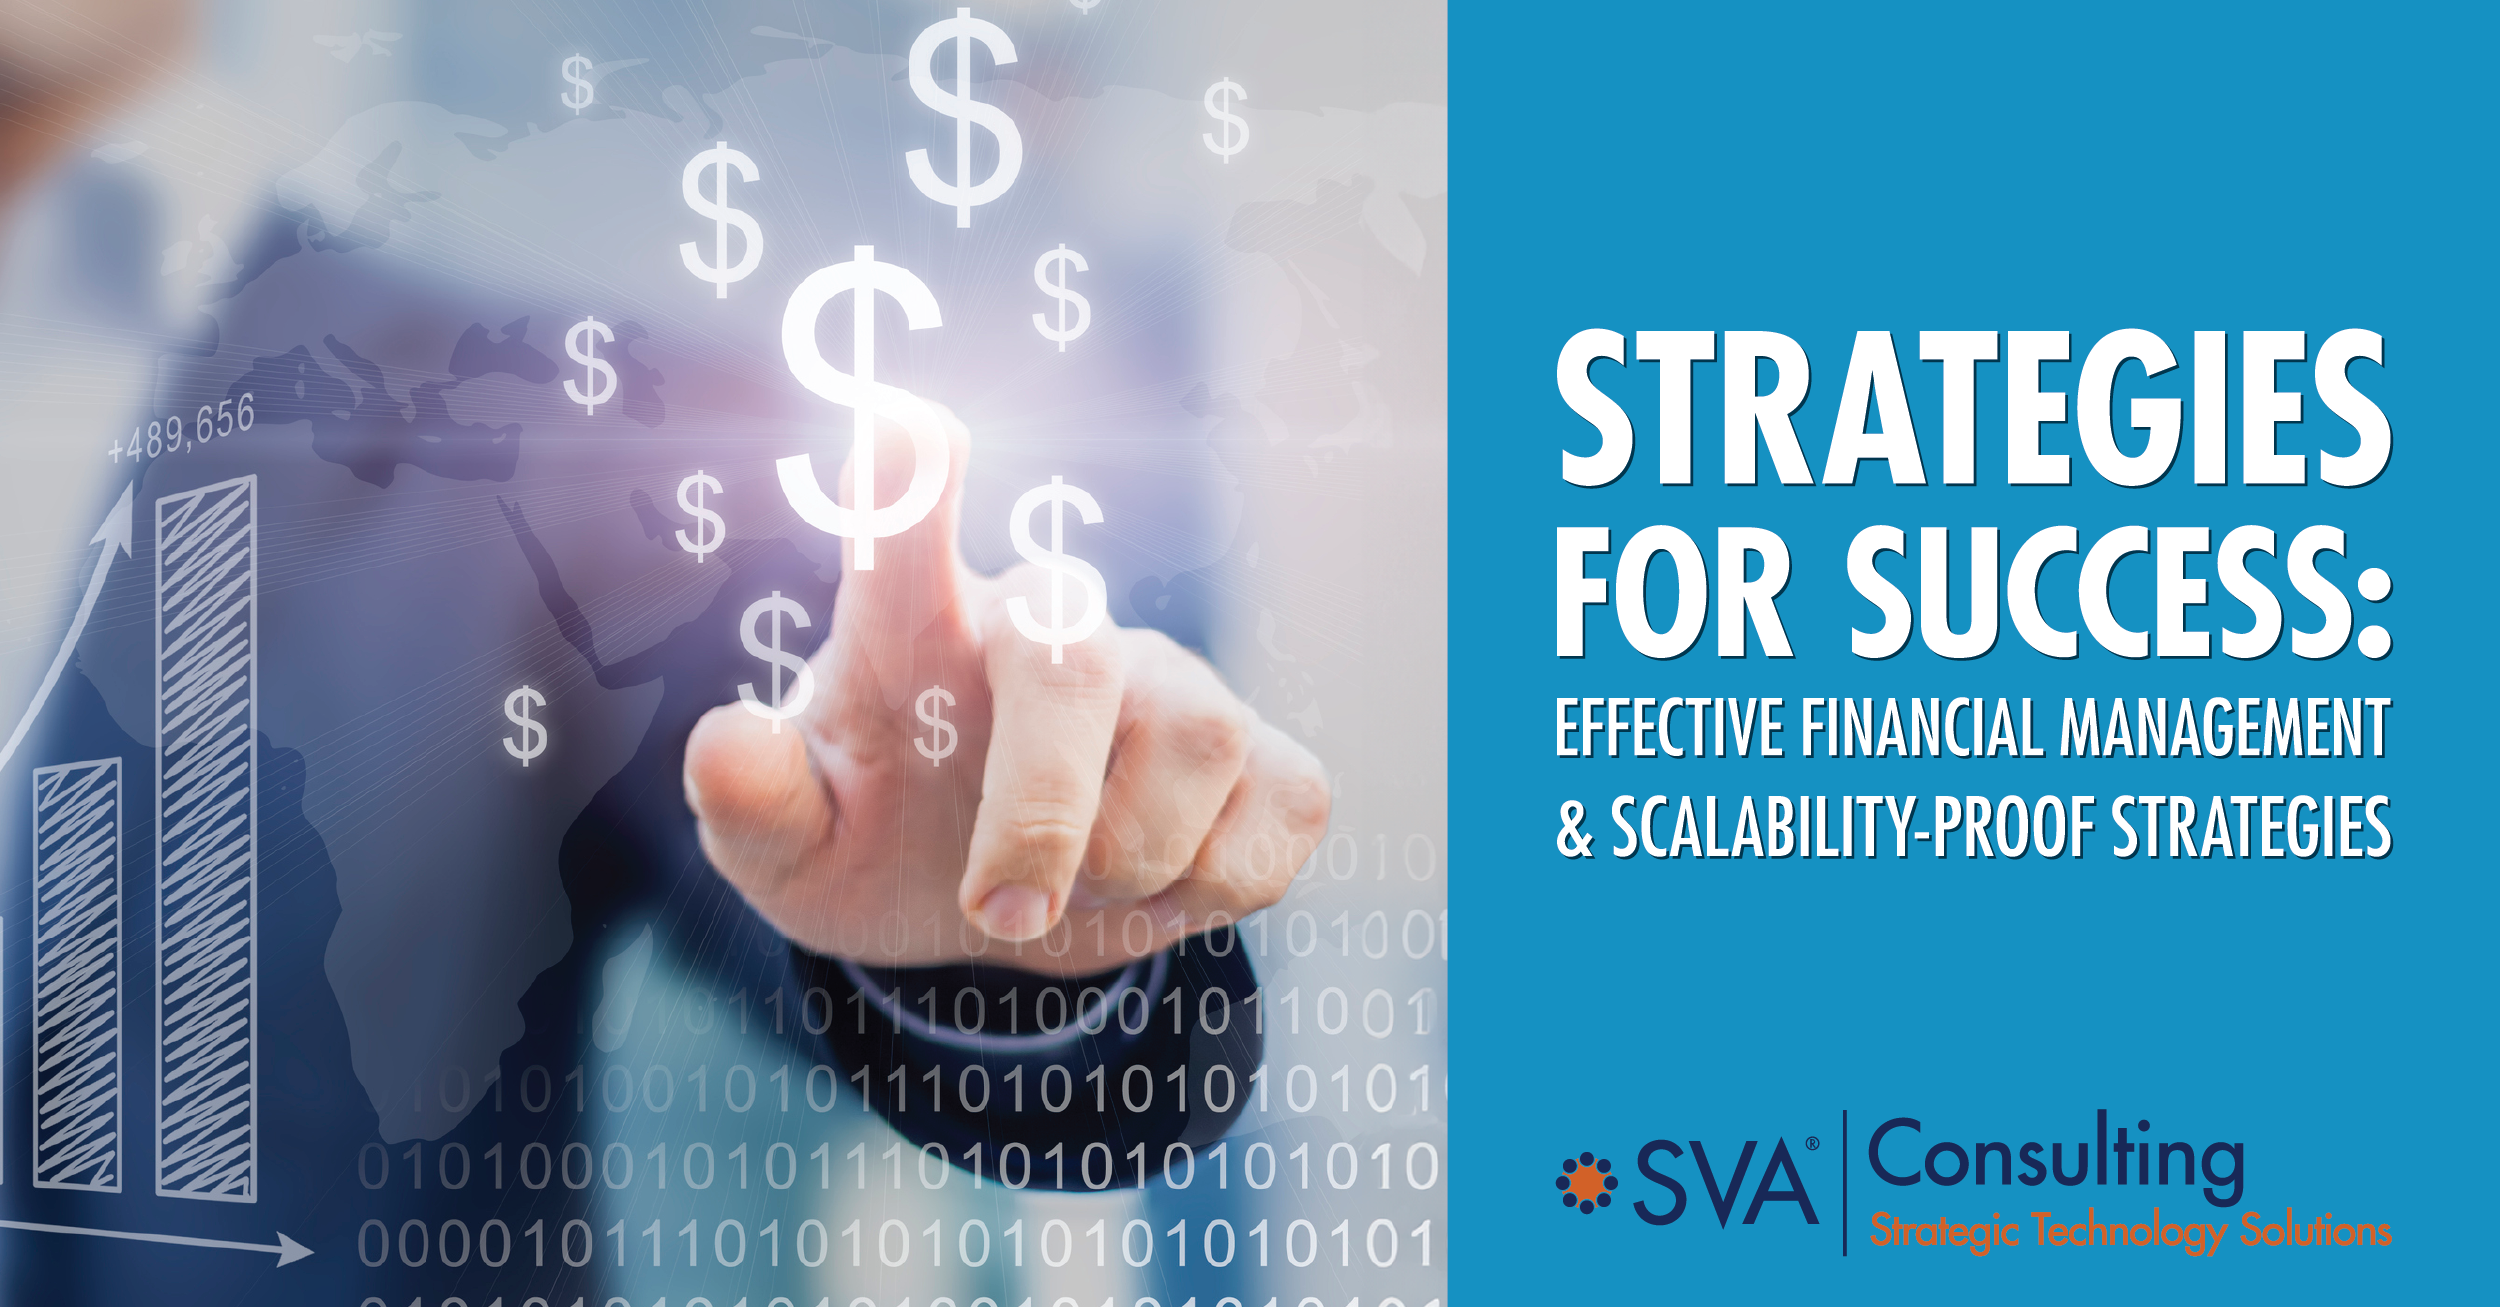 Strategies for Success: Effective Financial Management and Scalability-Proof Strategies